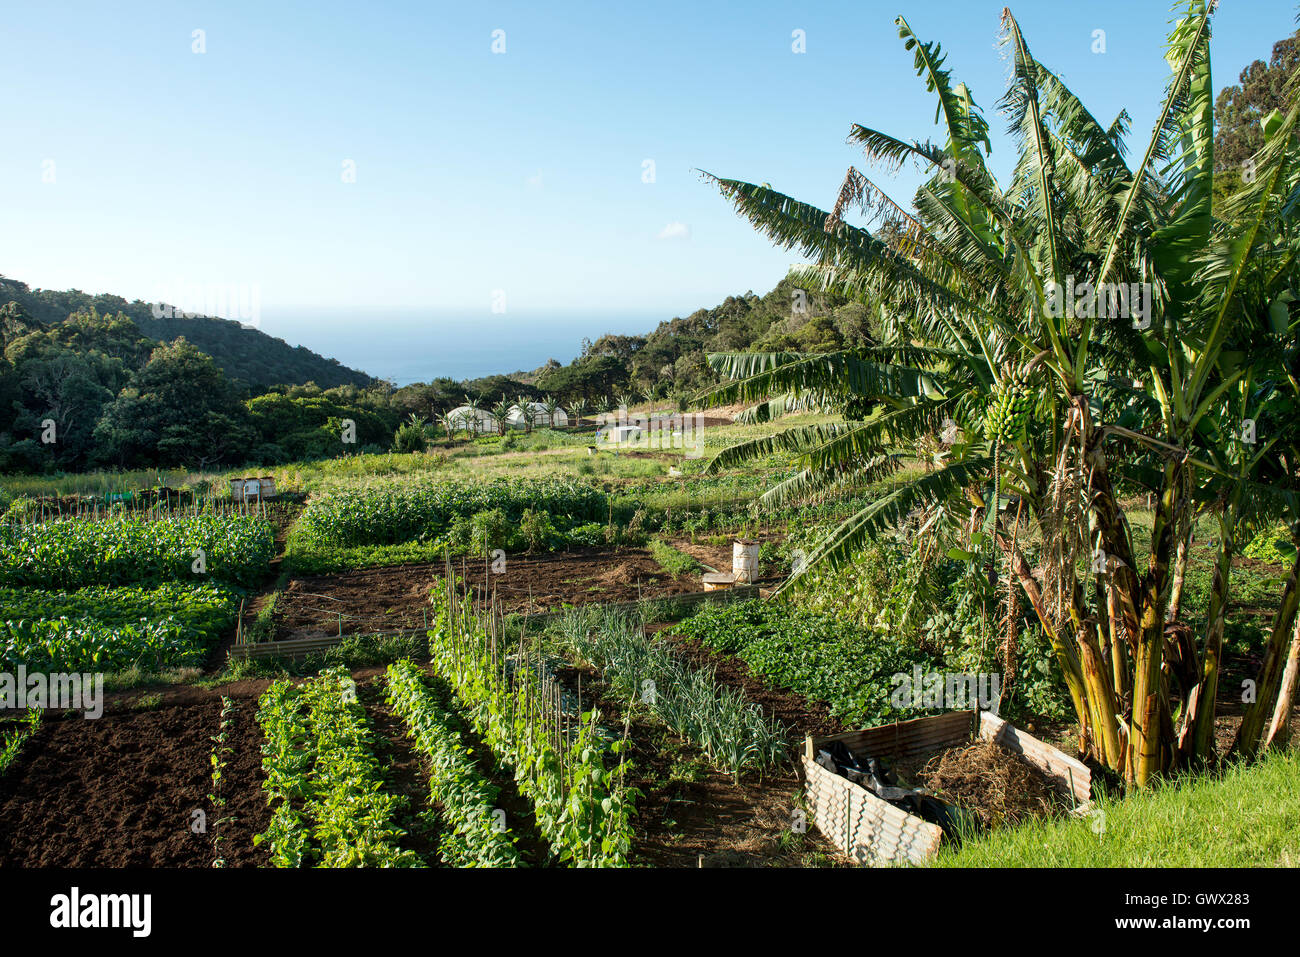 St Helena Island South Atlantic Ocean Farming in St Paul's district.  Banana palms in foreground Stock Photo